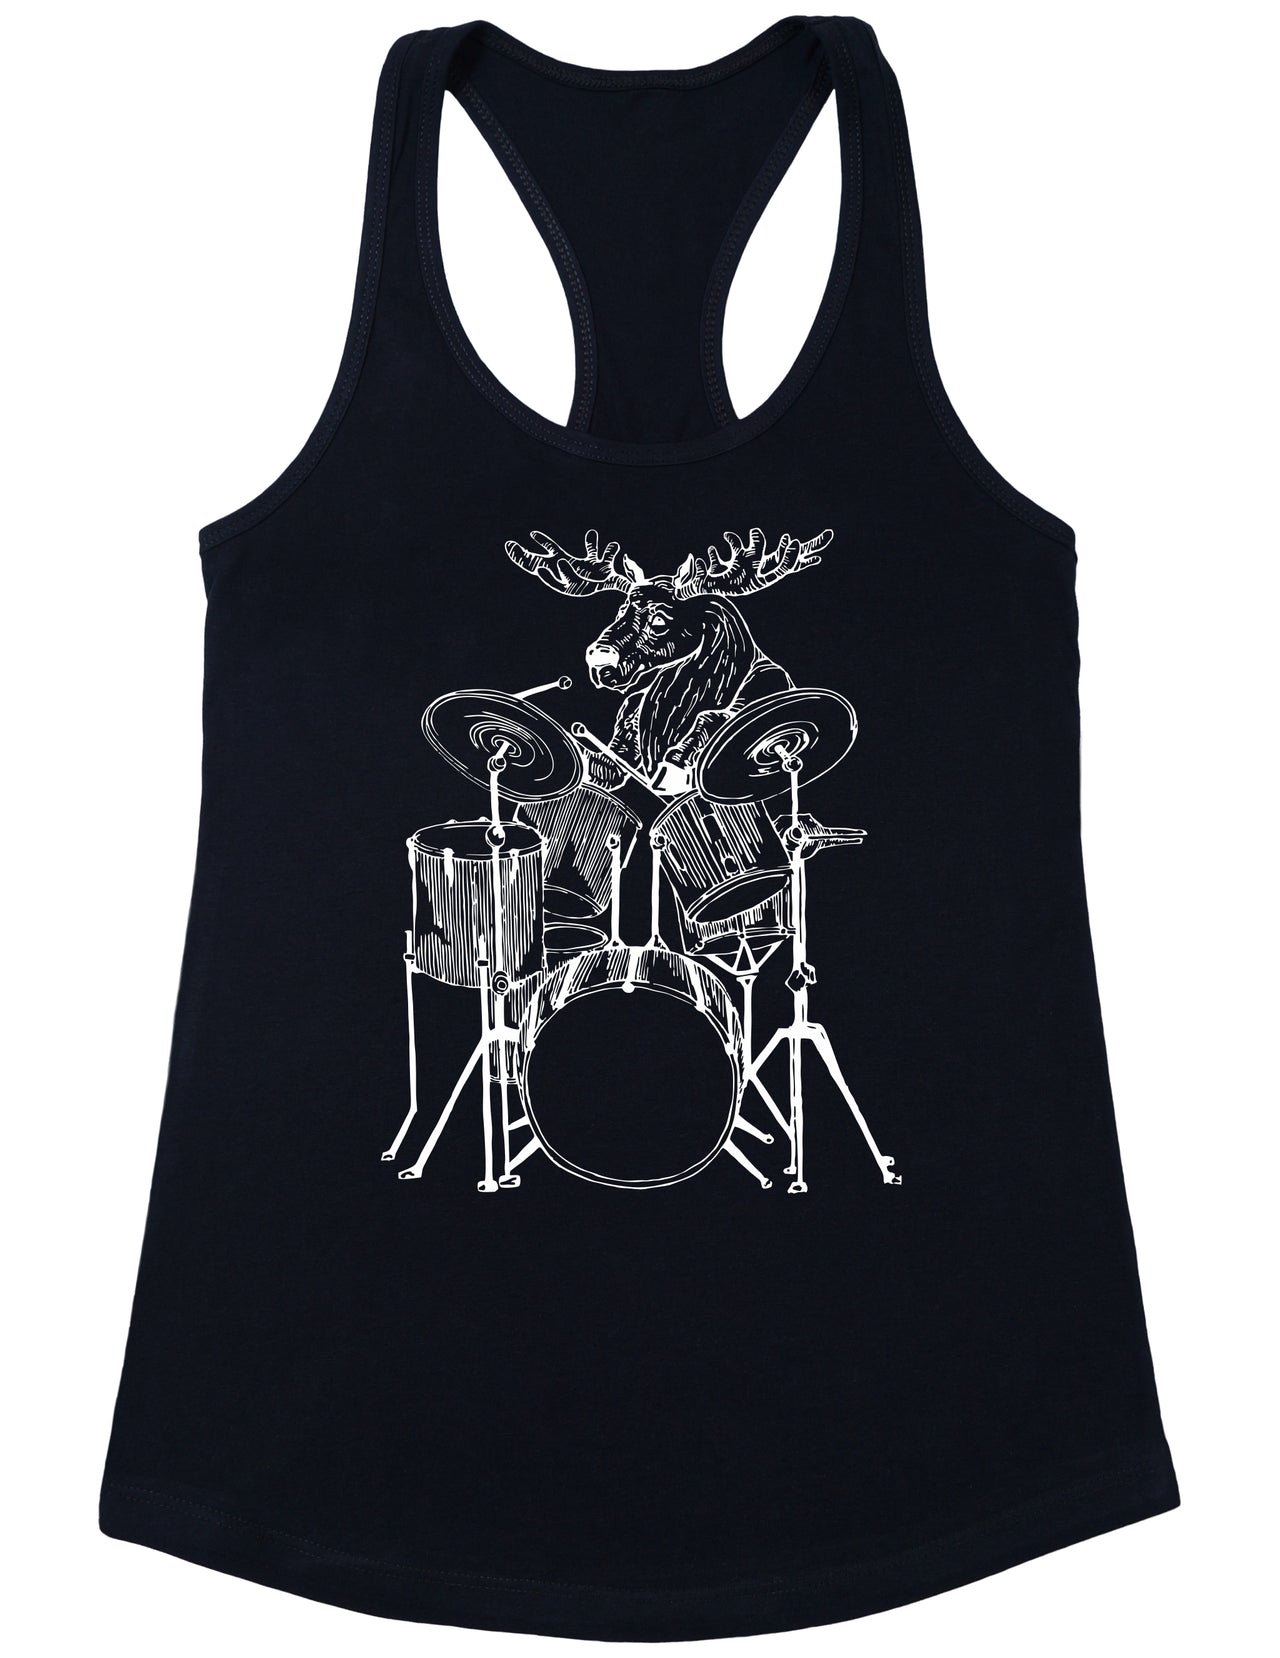 SEEMBO Moose Playing Drums Funny Drummer Musician Band Women Poly-Cotton Tank Top